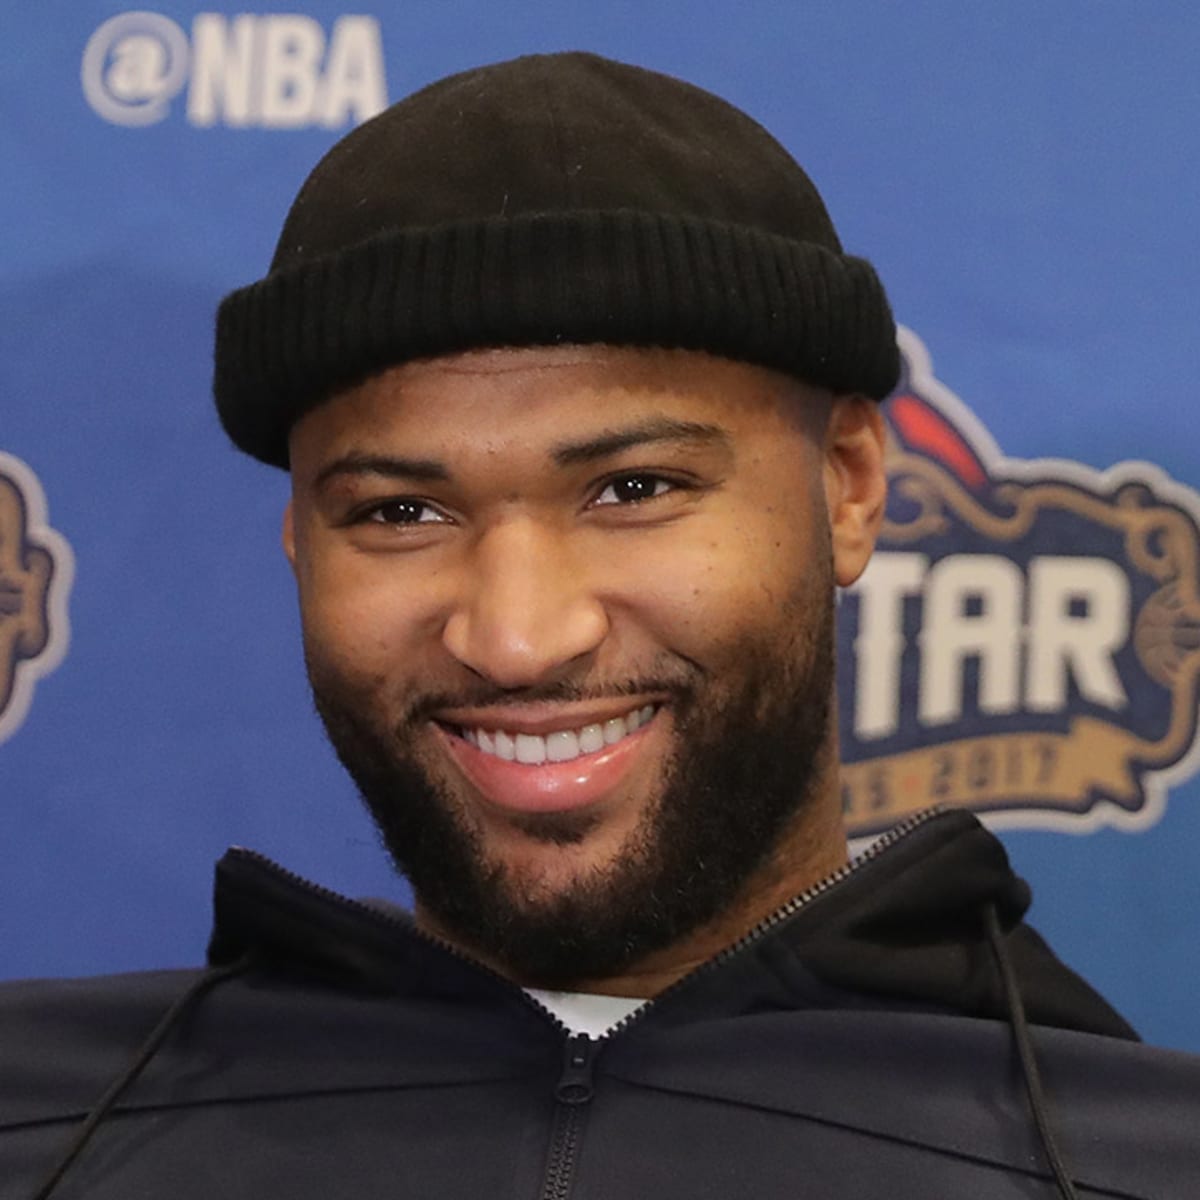 DeMarcus Cousins doubles down on harsh Kings organizational